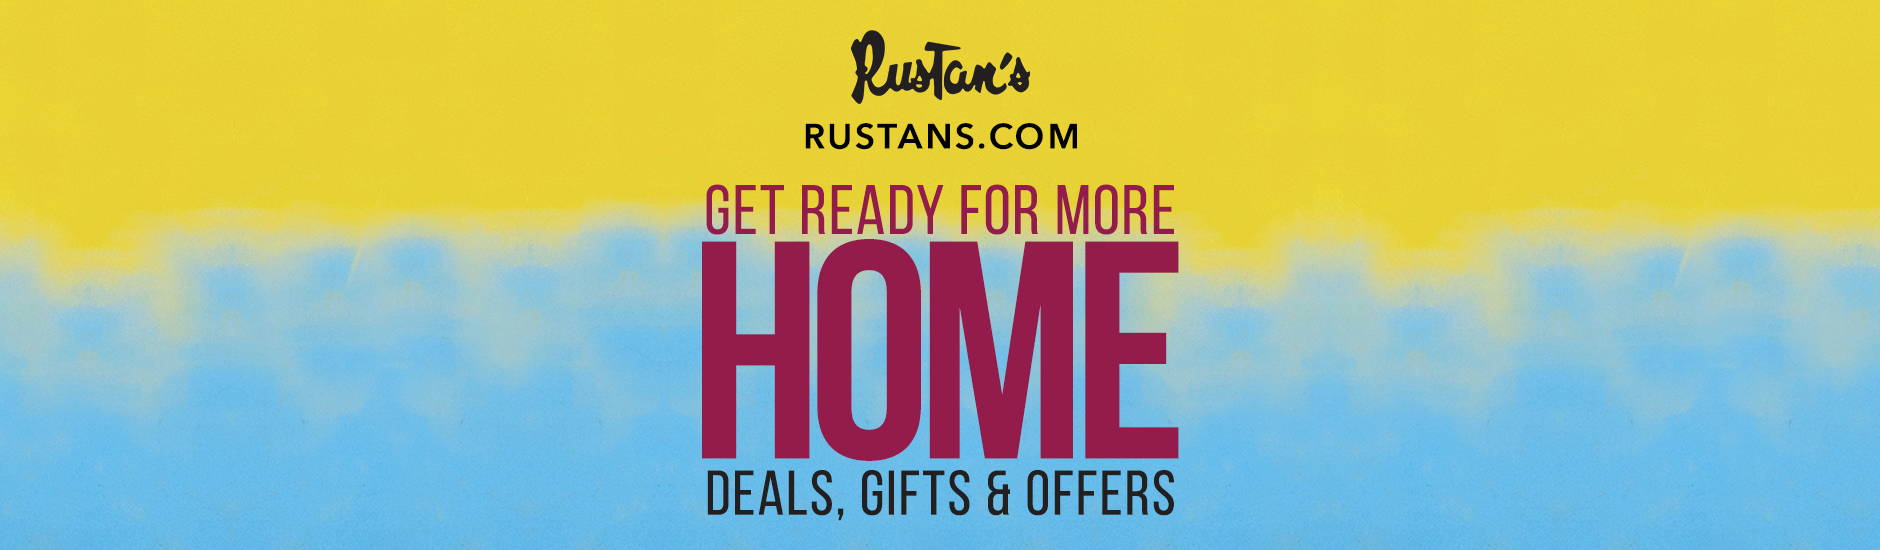 Get Ready for More Deals, Gifts & Offers: Home